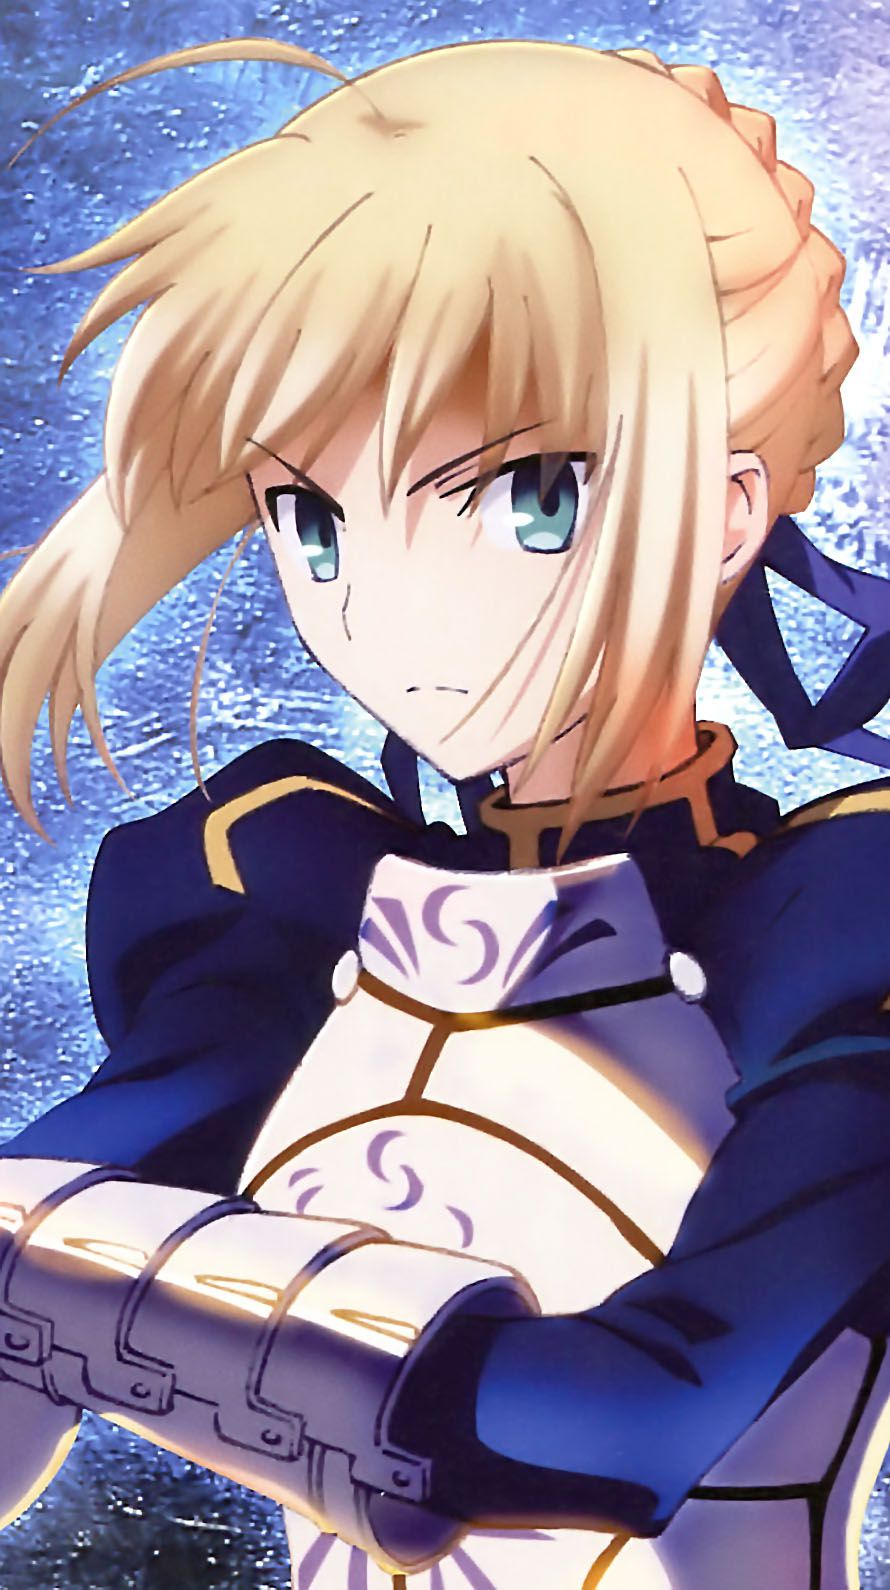 Fate Iphone壁紙画像 Androidスマホ壁紙 1 セイバー Iphone6 Iphone5s アニメ壁紙ネット Pc Android Iphone壁紙 画像